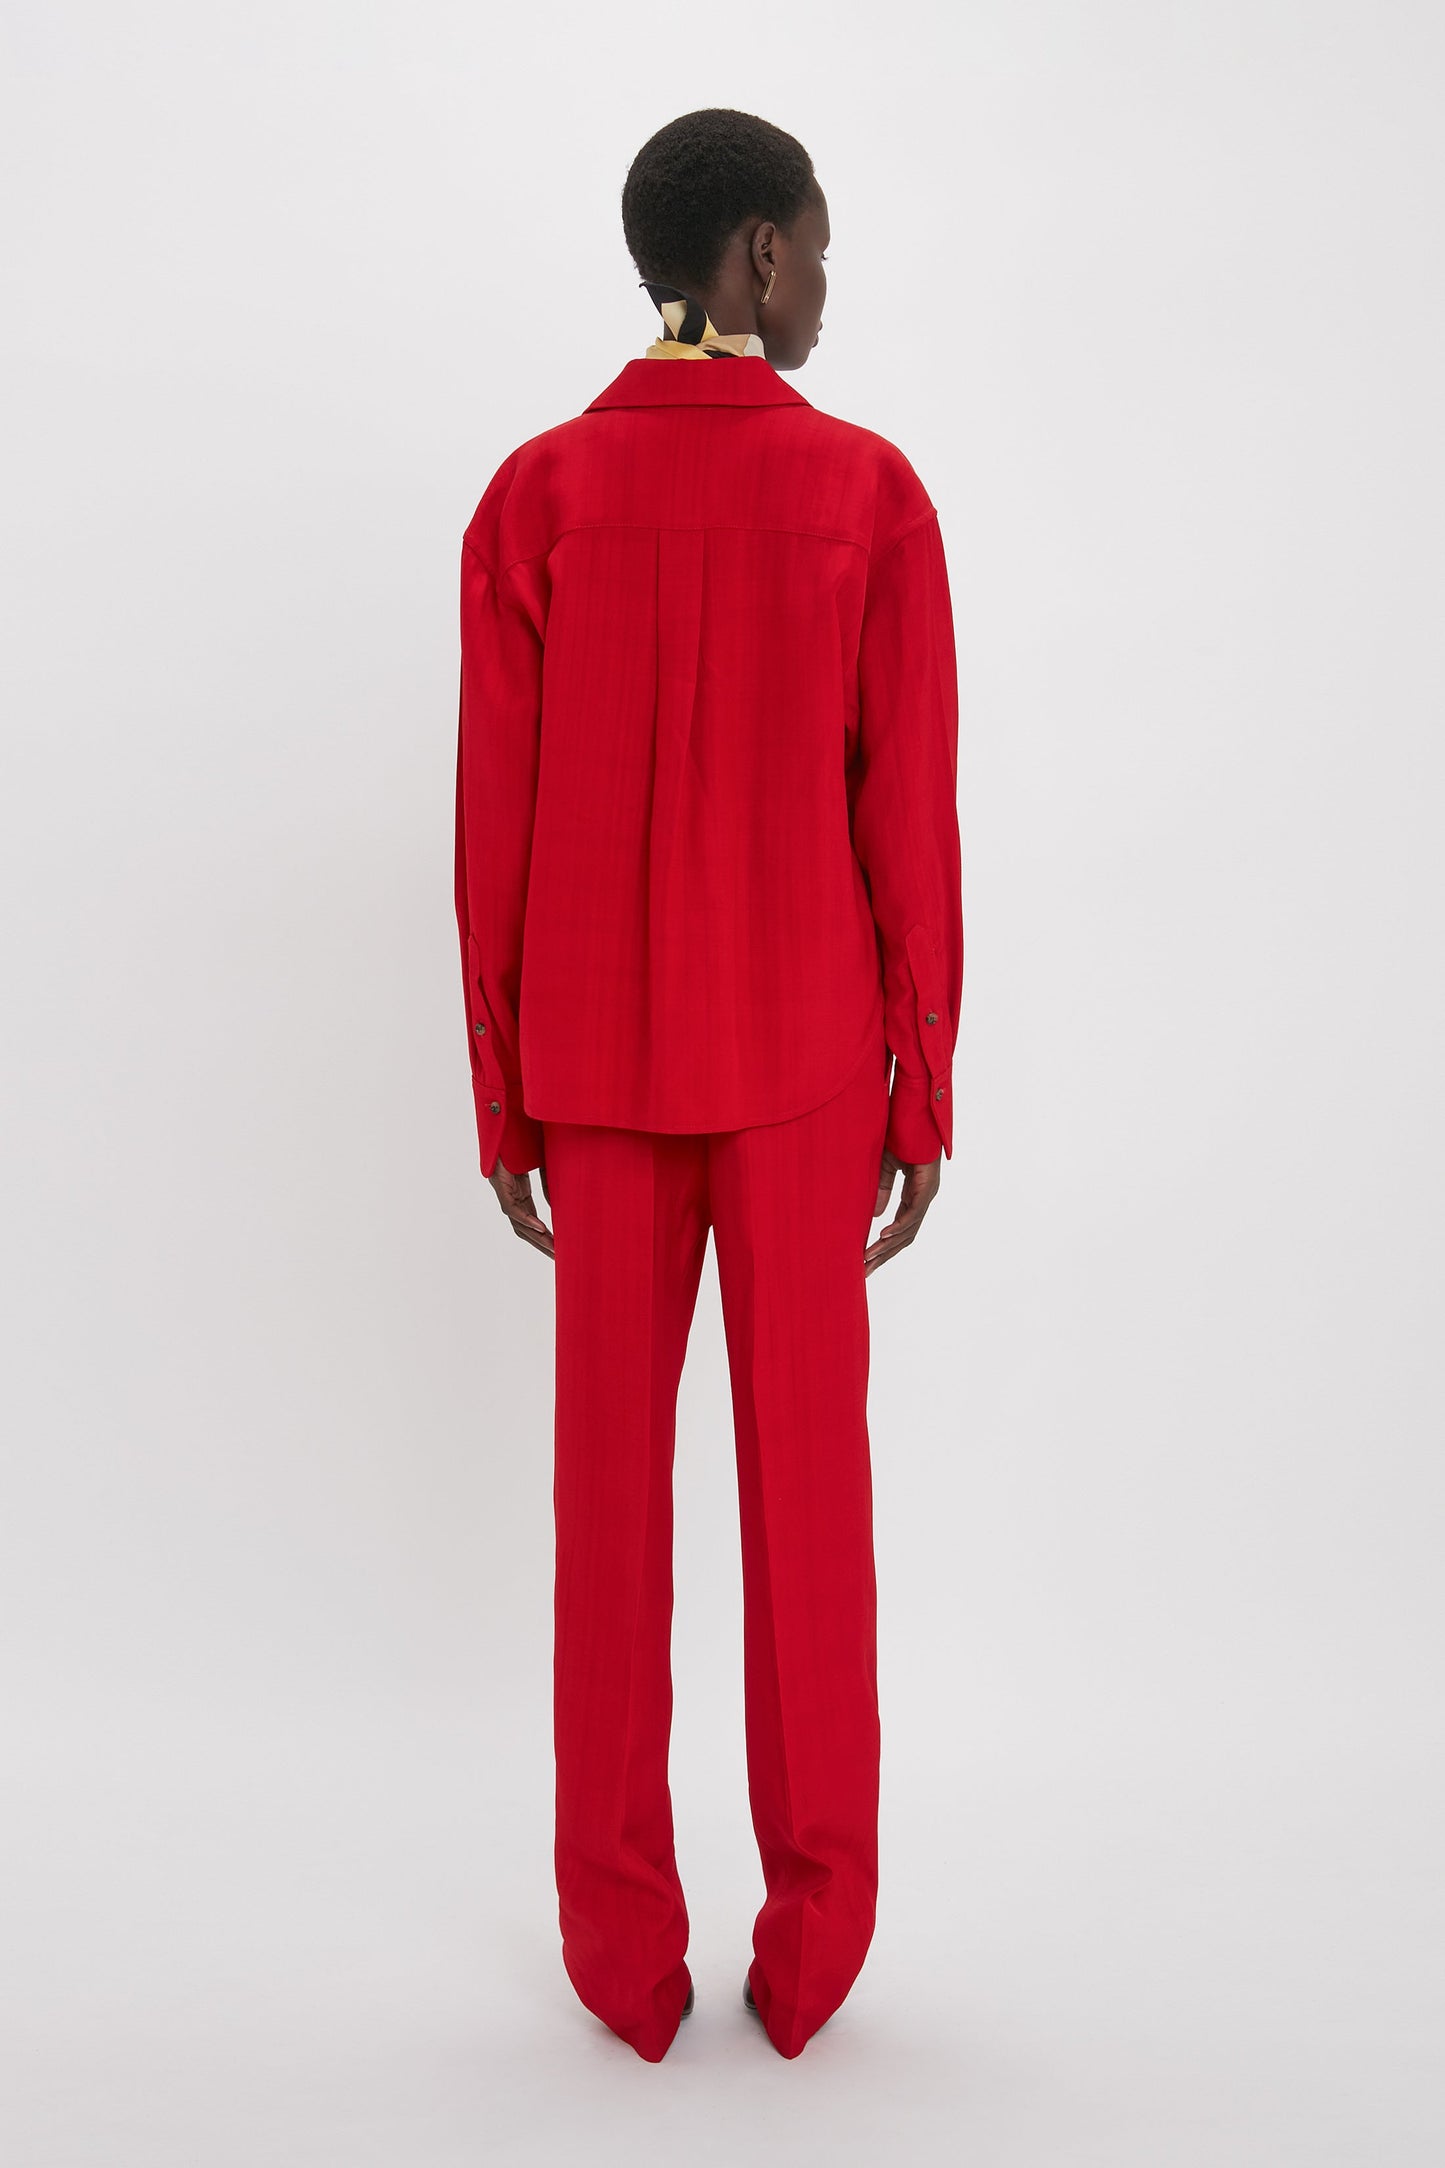 Person is standing facing away, wearing a bright red Victoria Beckham Cropped Long Sleeve Shirt In Carmine and matching red pants against a plain white background.